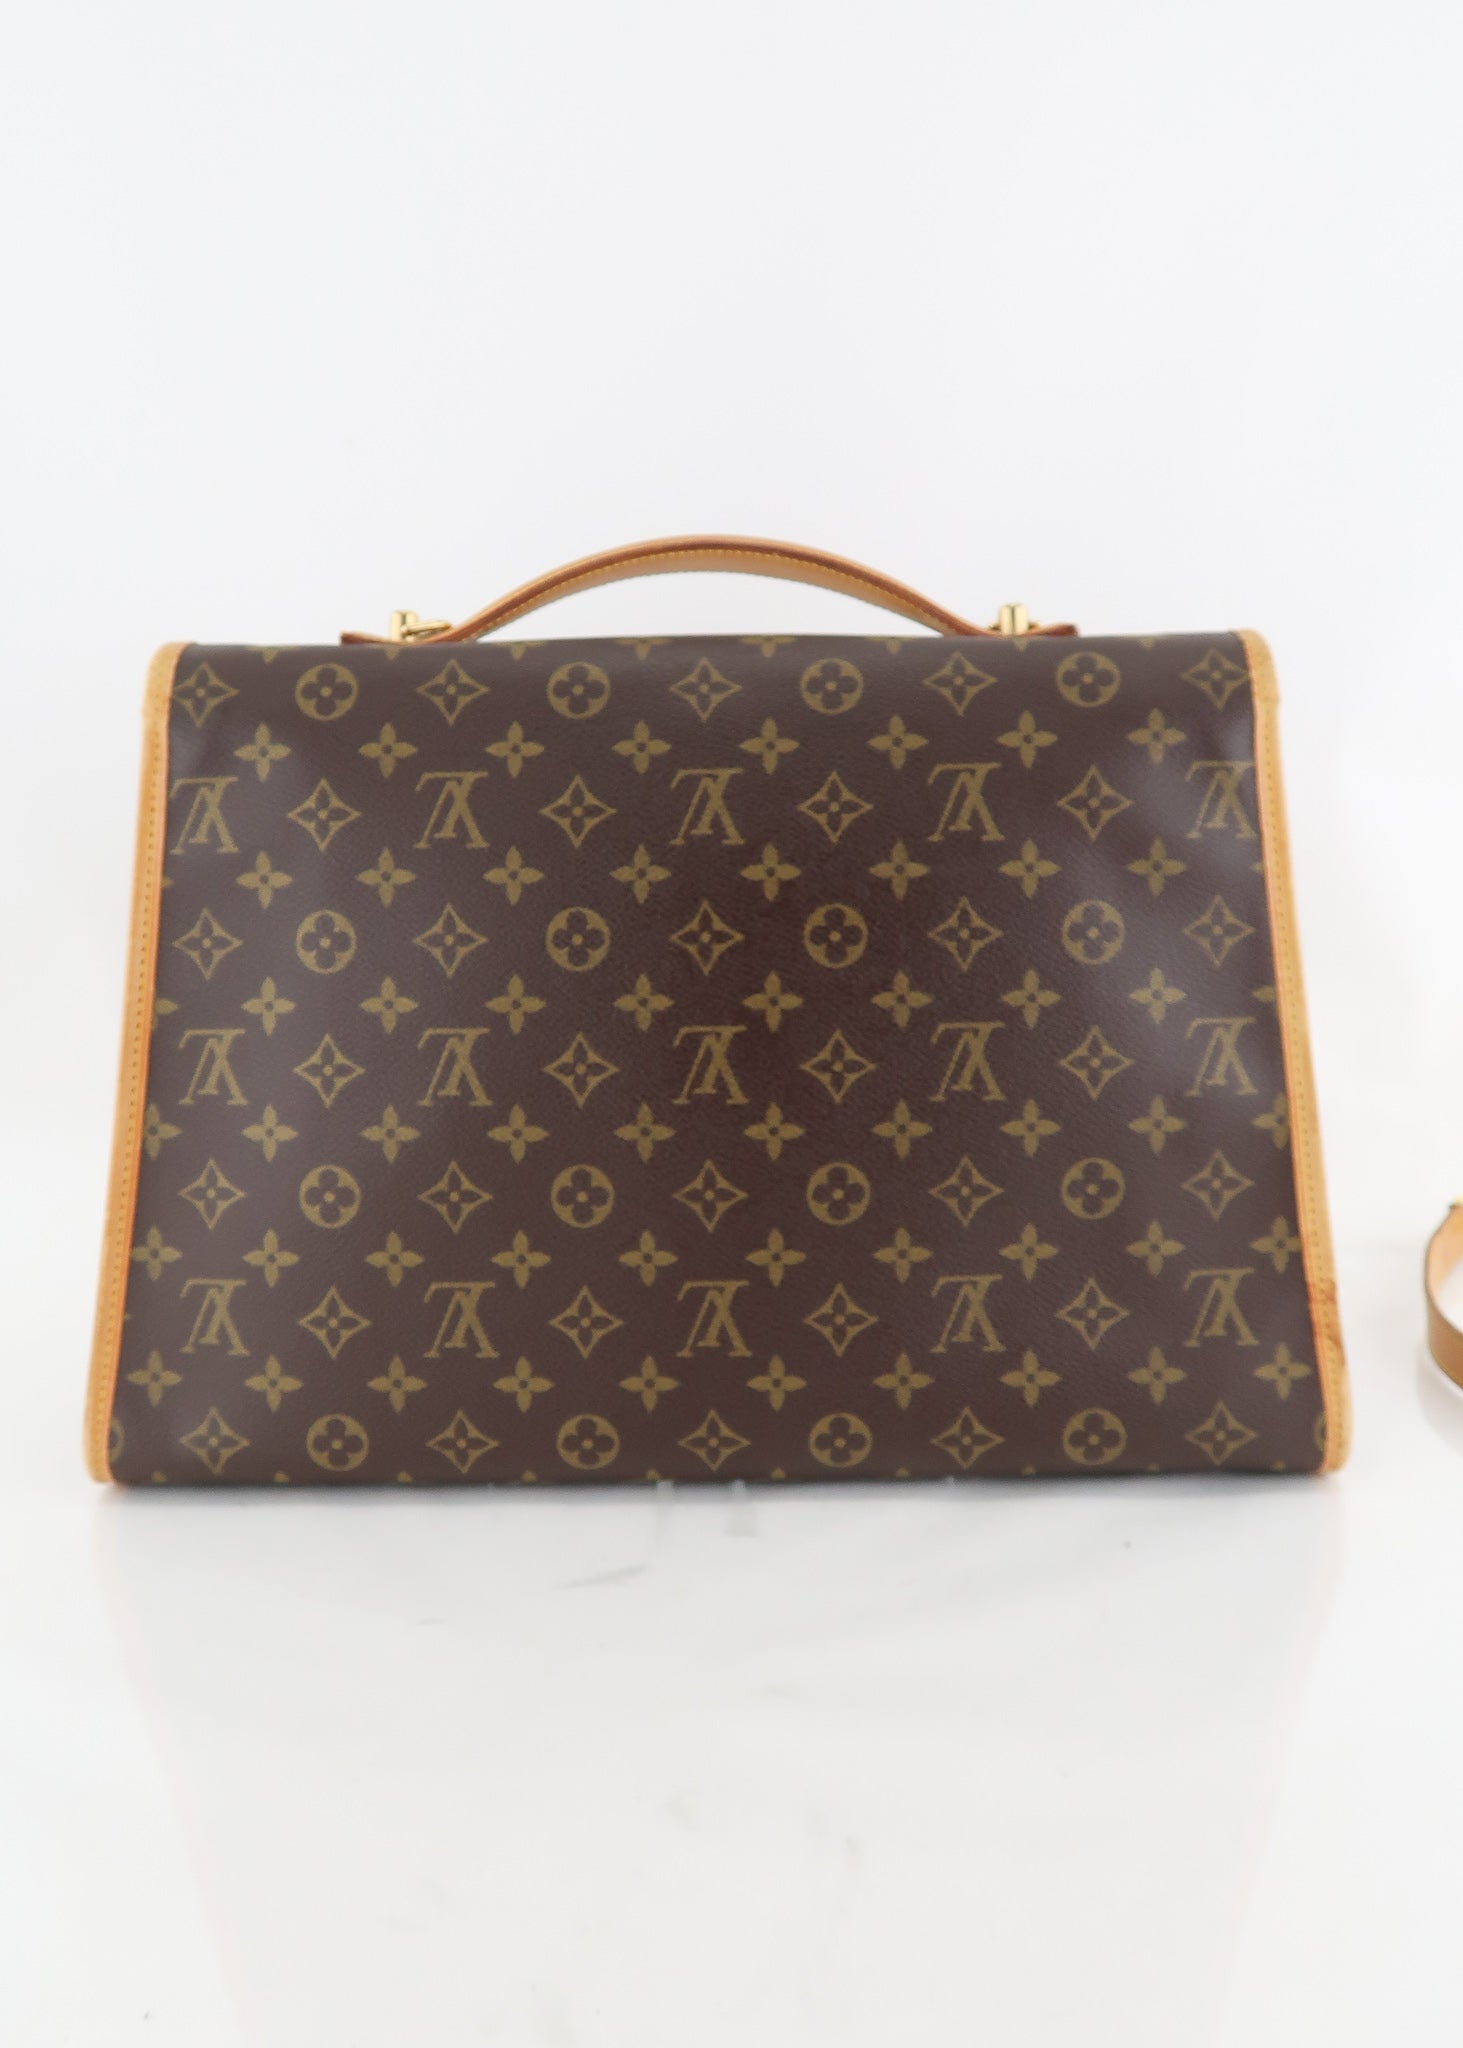 AUTHENTIC Louis Vuitton Beverly Clutch Monogram PREOWNED